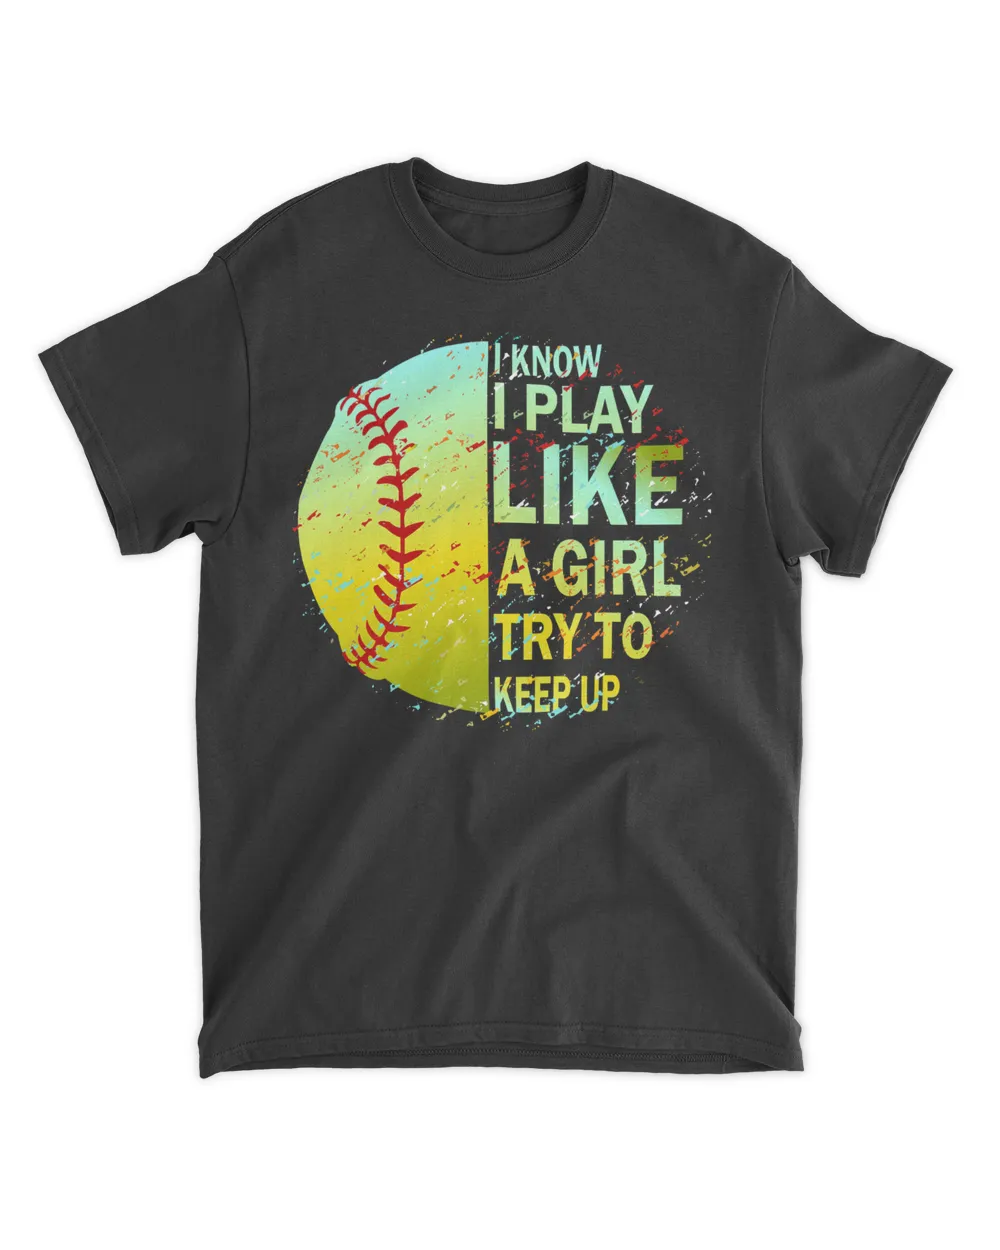 Awesome Softball I Know I Play Like A Girl Try To Keep Up Funny Say Girls 15m1